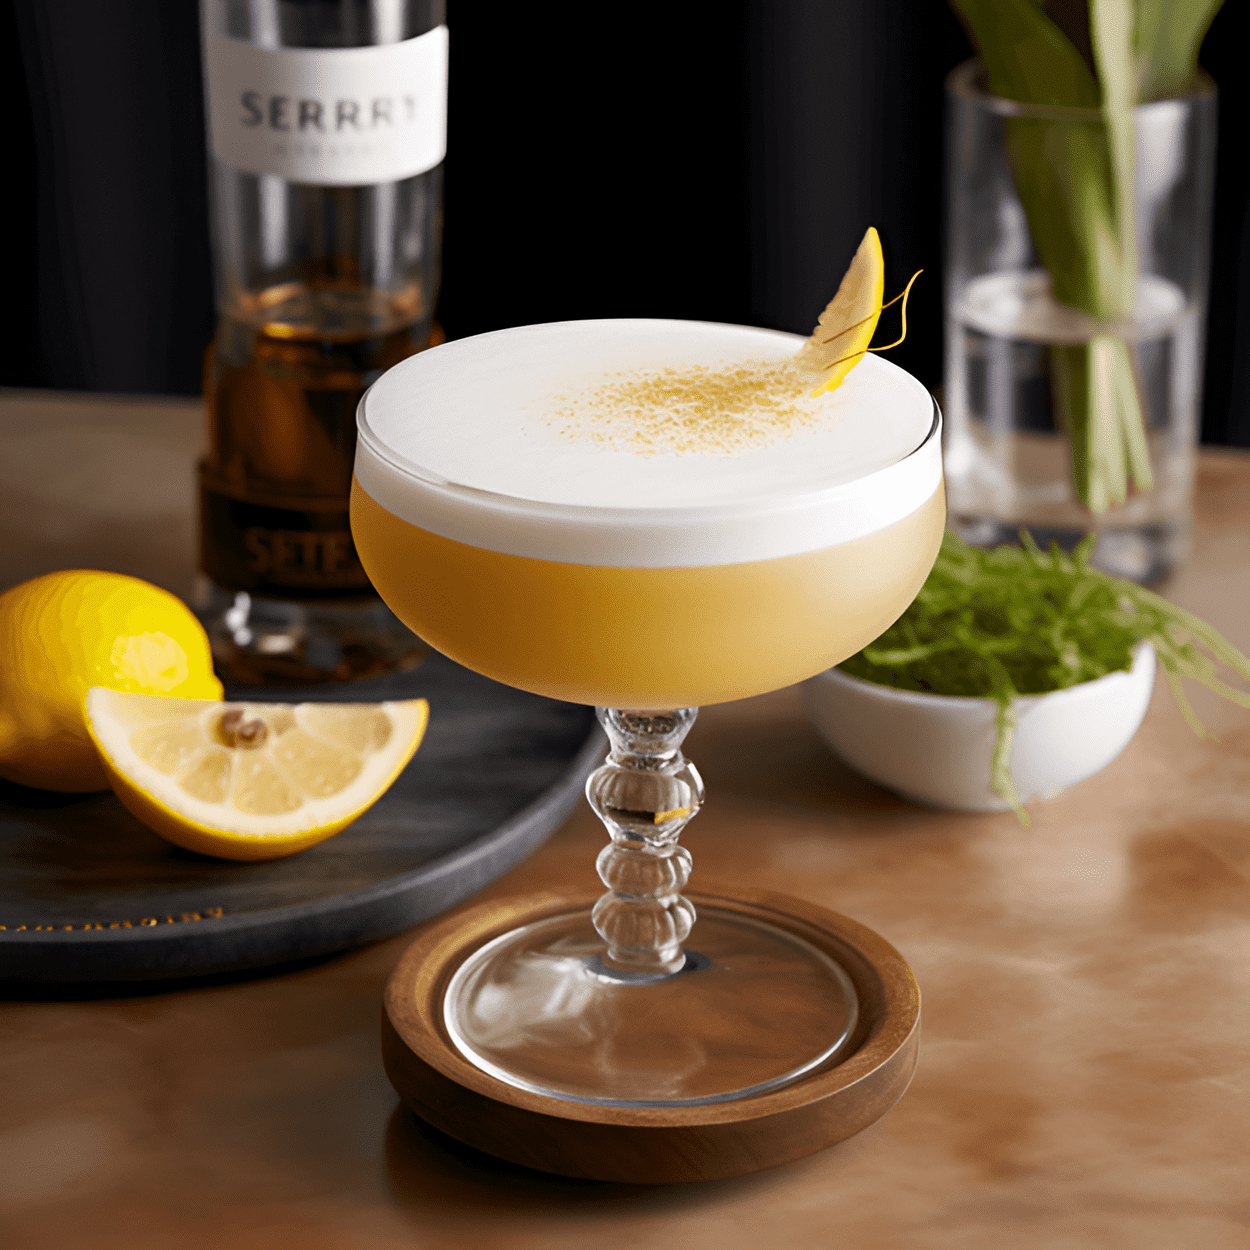 Sherry Sour Cocktail Recipe - The Sherry Sour is a well-balanced cocktail with a combination of sweet, sour, and slightly nutty flavors. The sherry provides a rich and complex base, while the lemon juice adds a refreshing tartness. The simple syrup brings a touch of sweetness to balance the sour notes, resulting in a smooth and satisfying drink.